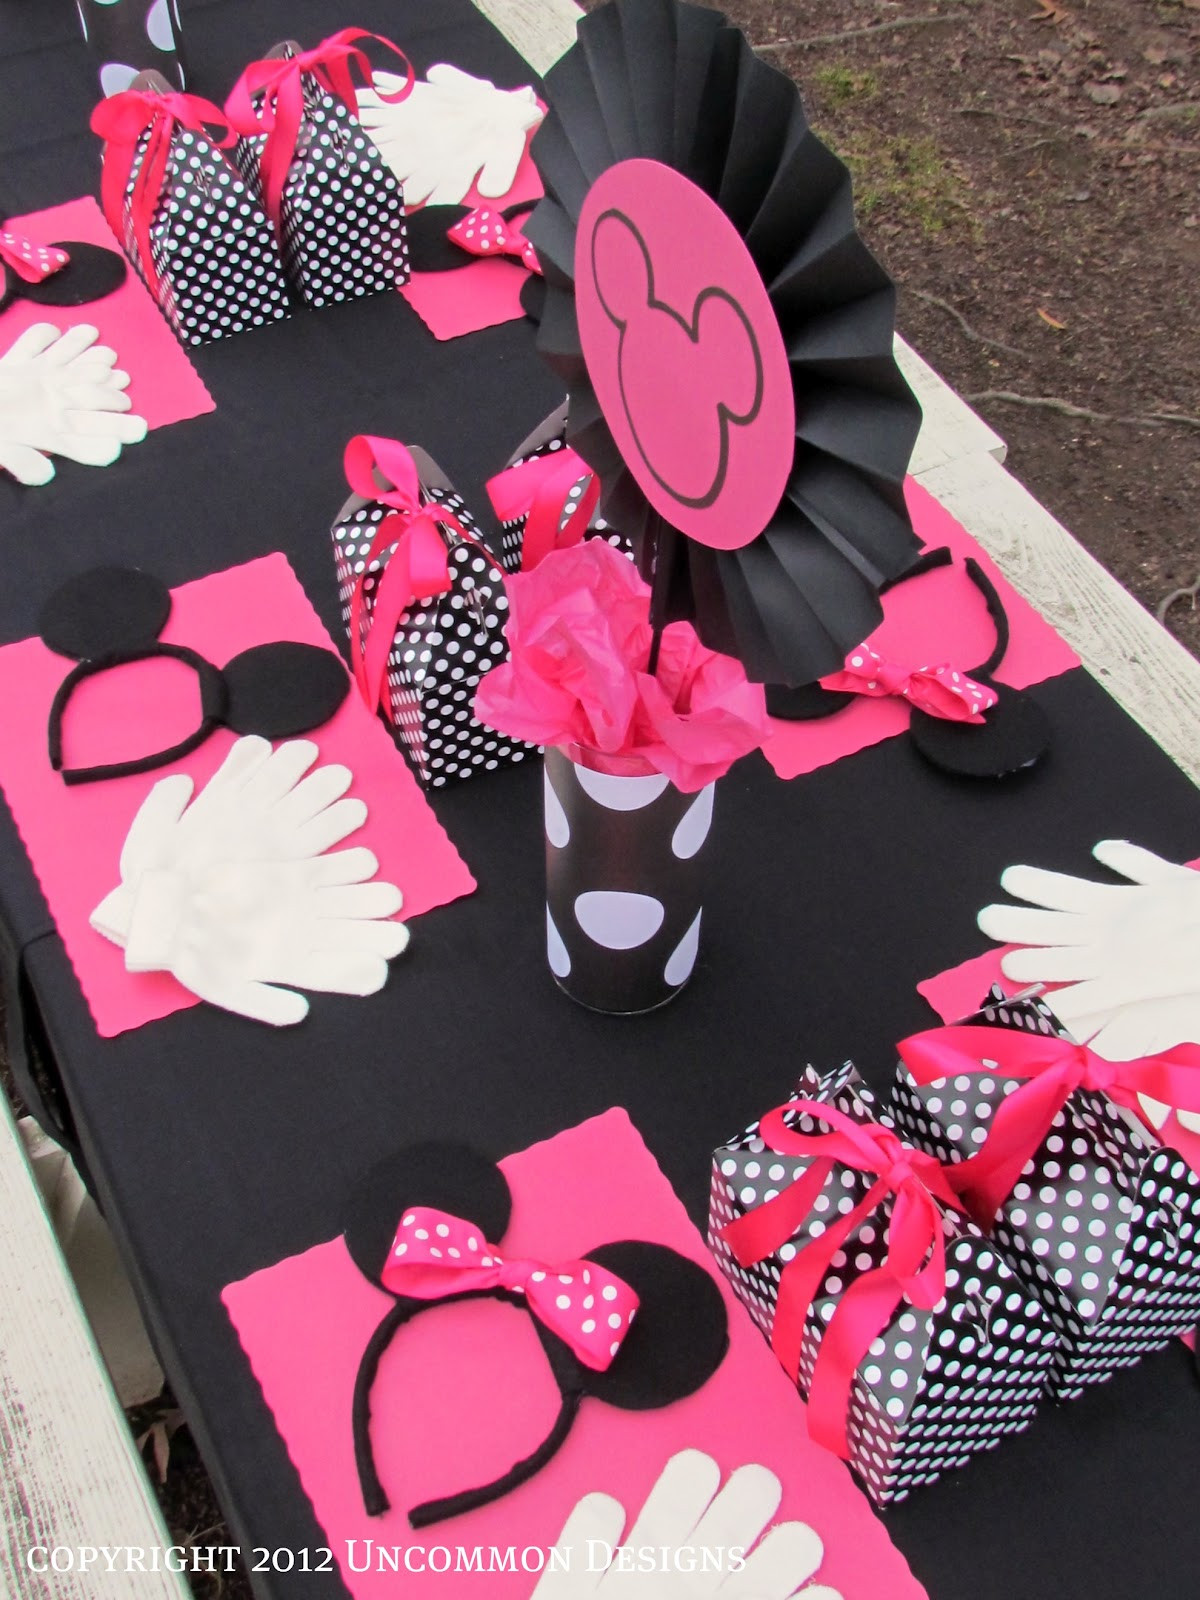 Minnie Mouse Birthday Decorations
 A Minnie Mouse Birthday Party